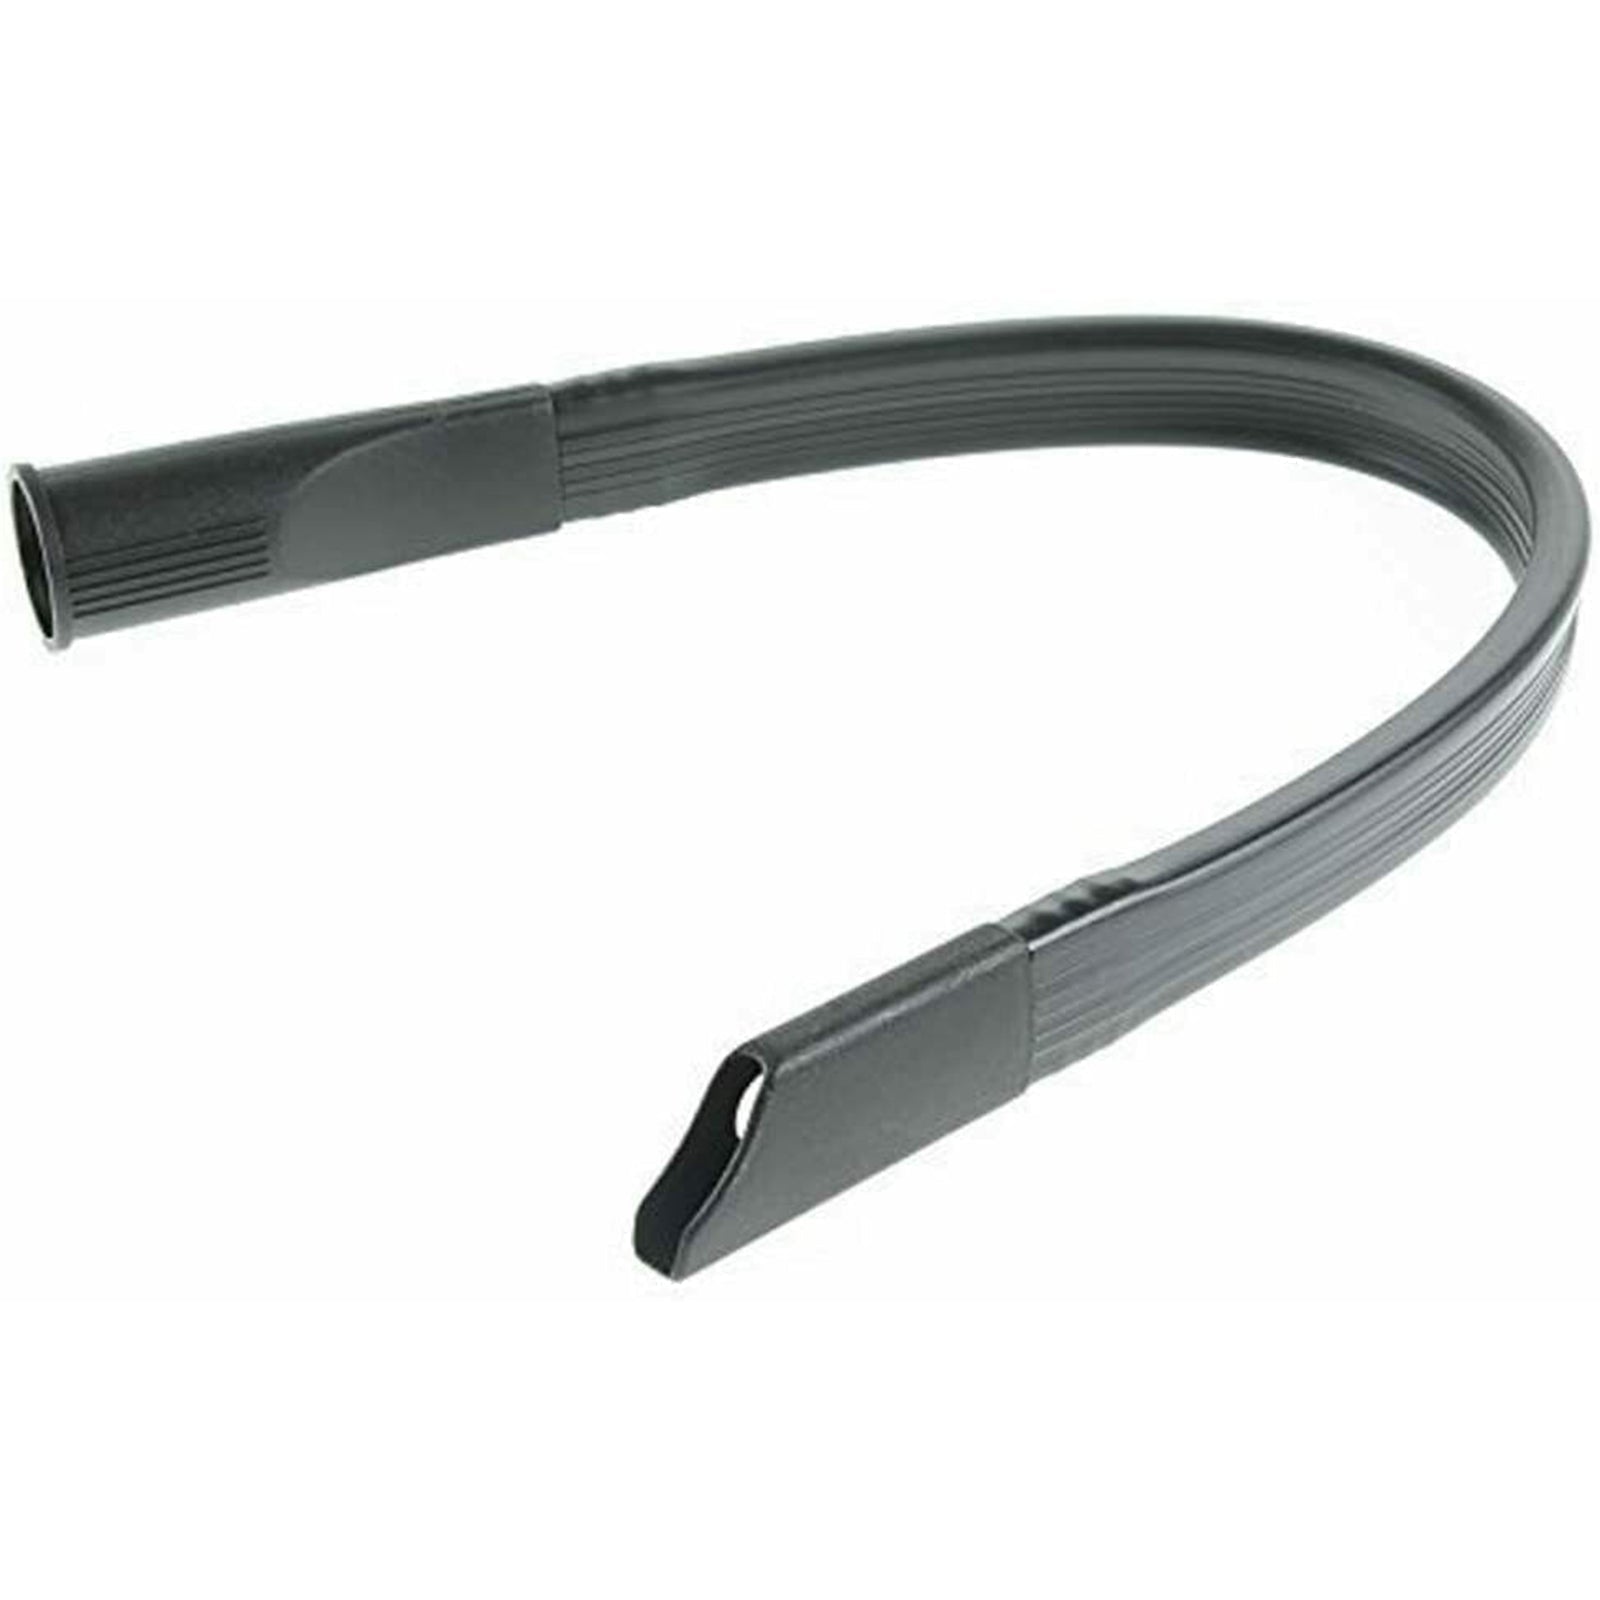 Flexible Crevice Tool Extra Long compatible with MIELE Vacuum Cleaner (32mm or 35mm)